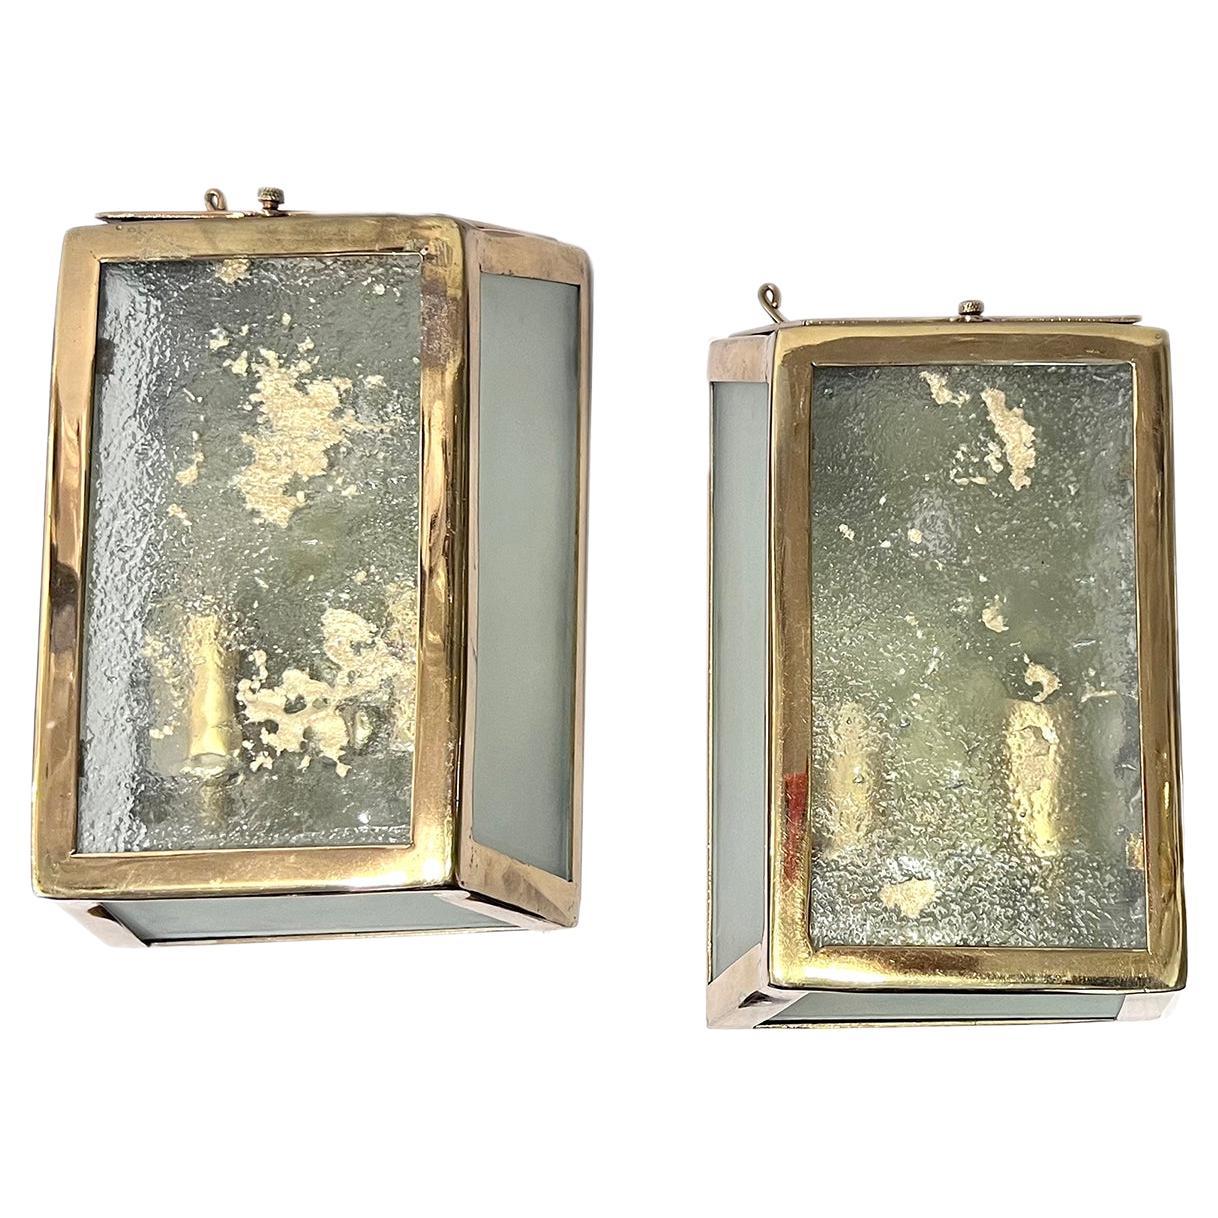 Pair of circa 1950s French art glass sconces with 2 interior lights.

Measurements:
Height: 9.5